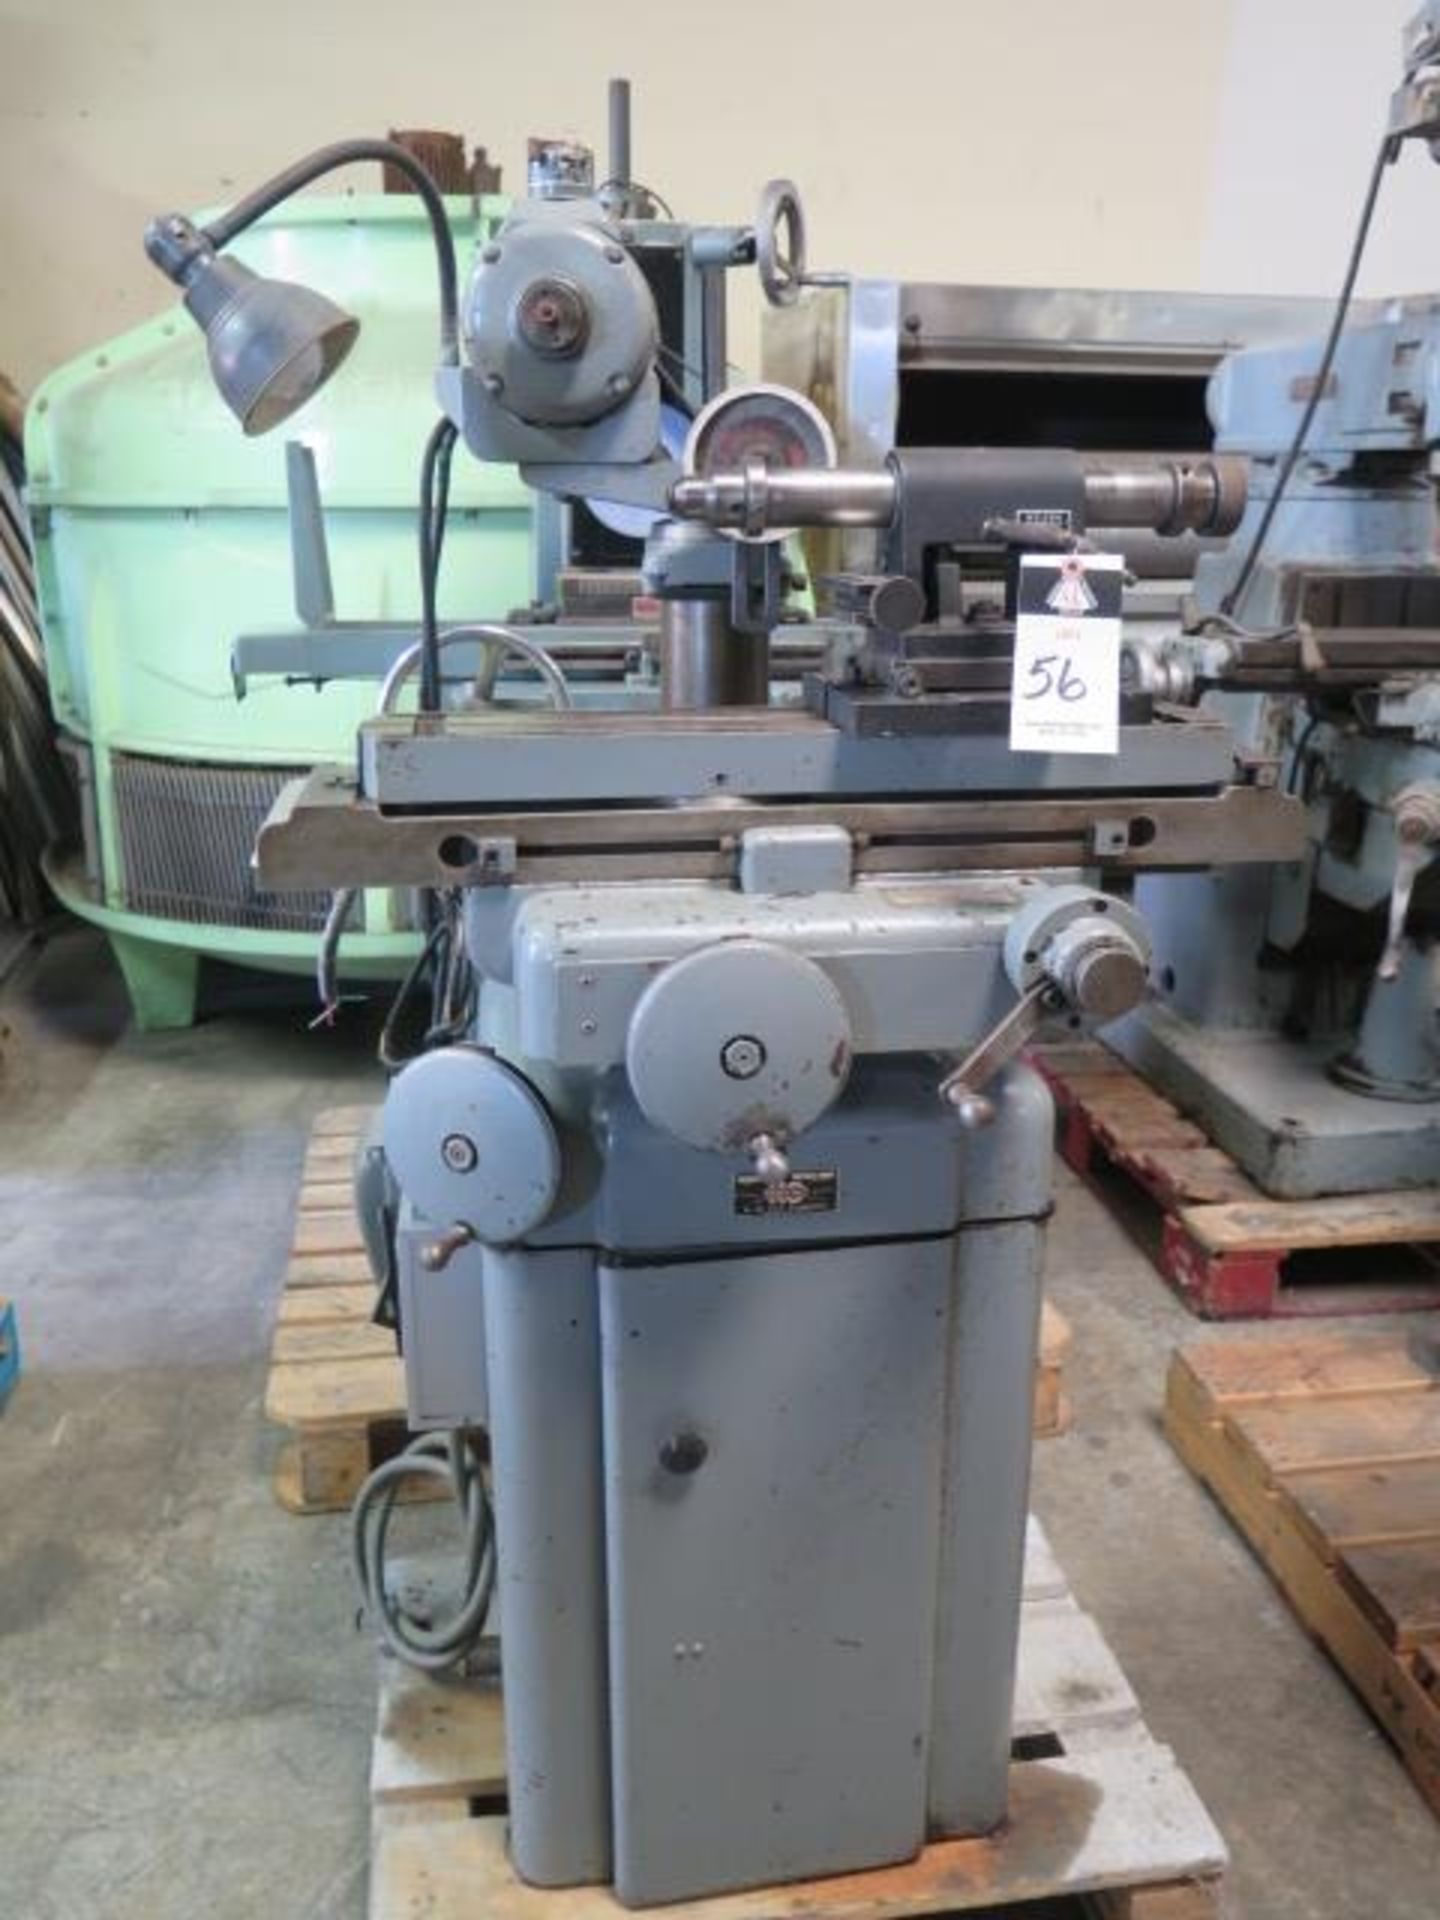 K.O.Lee BA860 Tool and Cutter Grinder s/n 5051 w/Weldon Air Fixture, 5” x 25” Table SOLD AS-IS